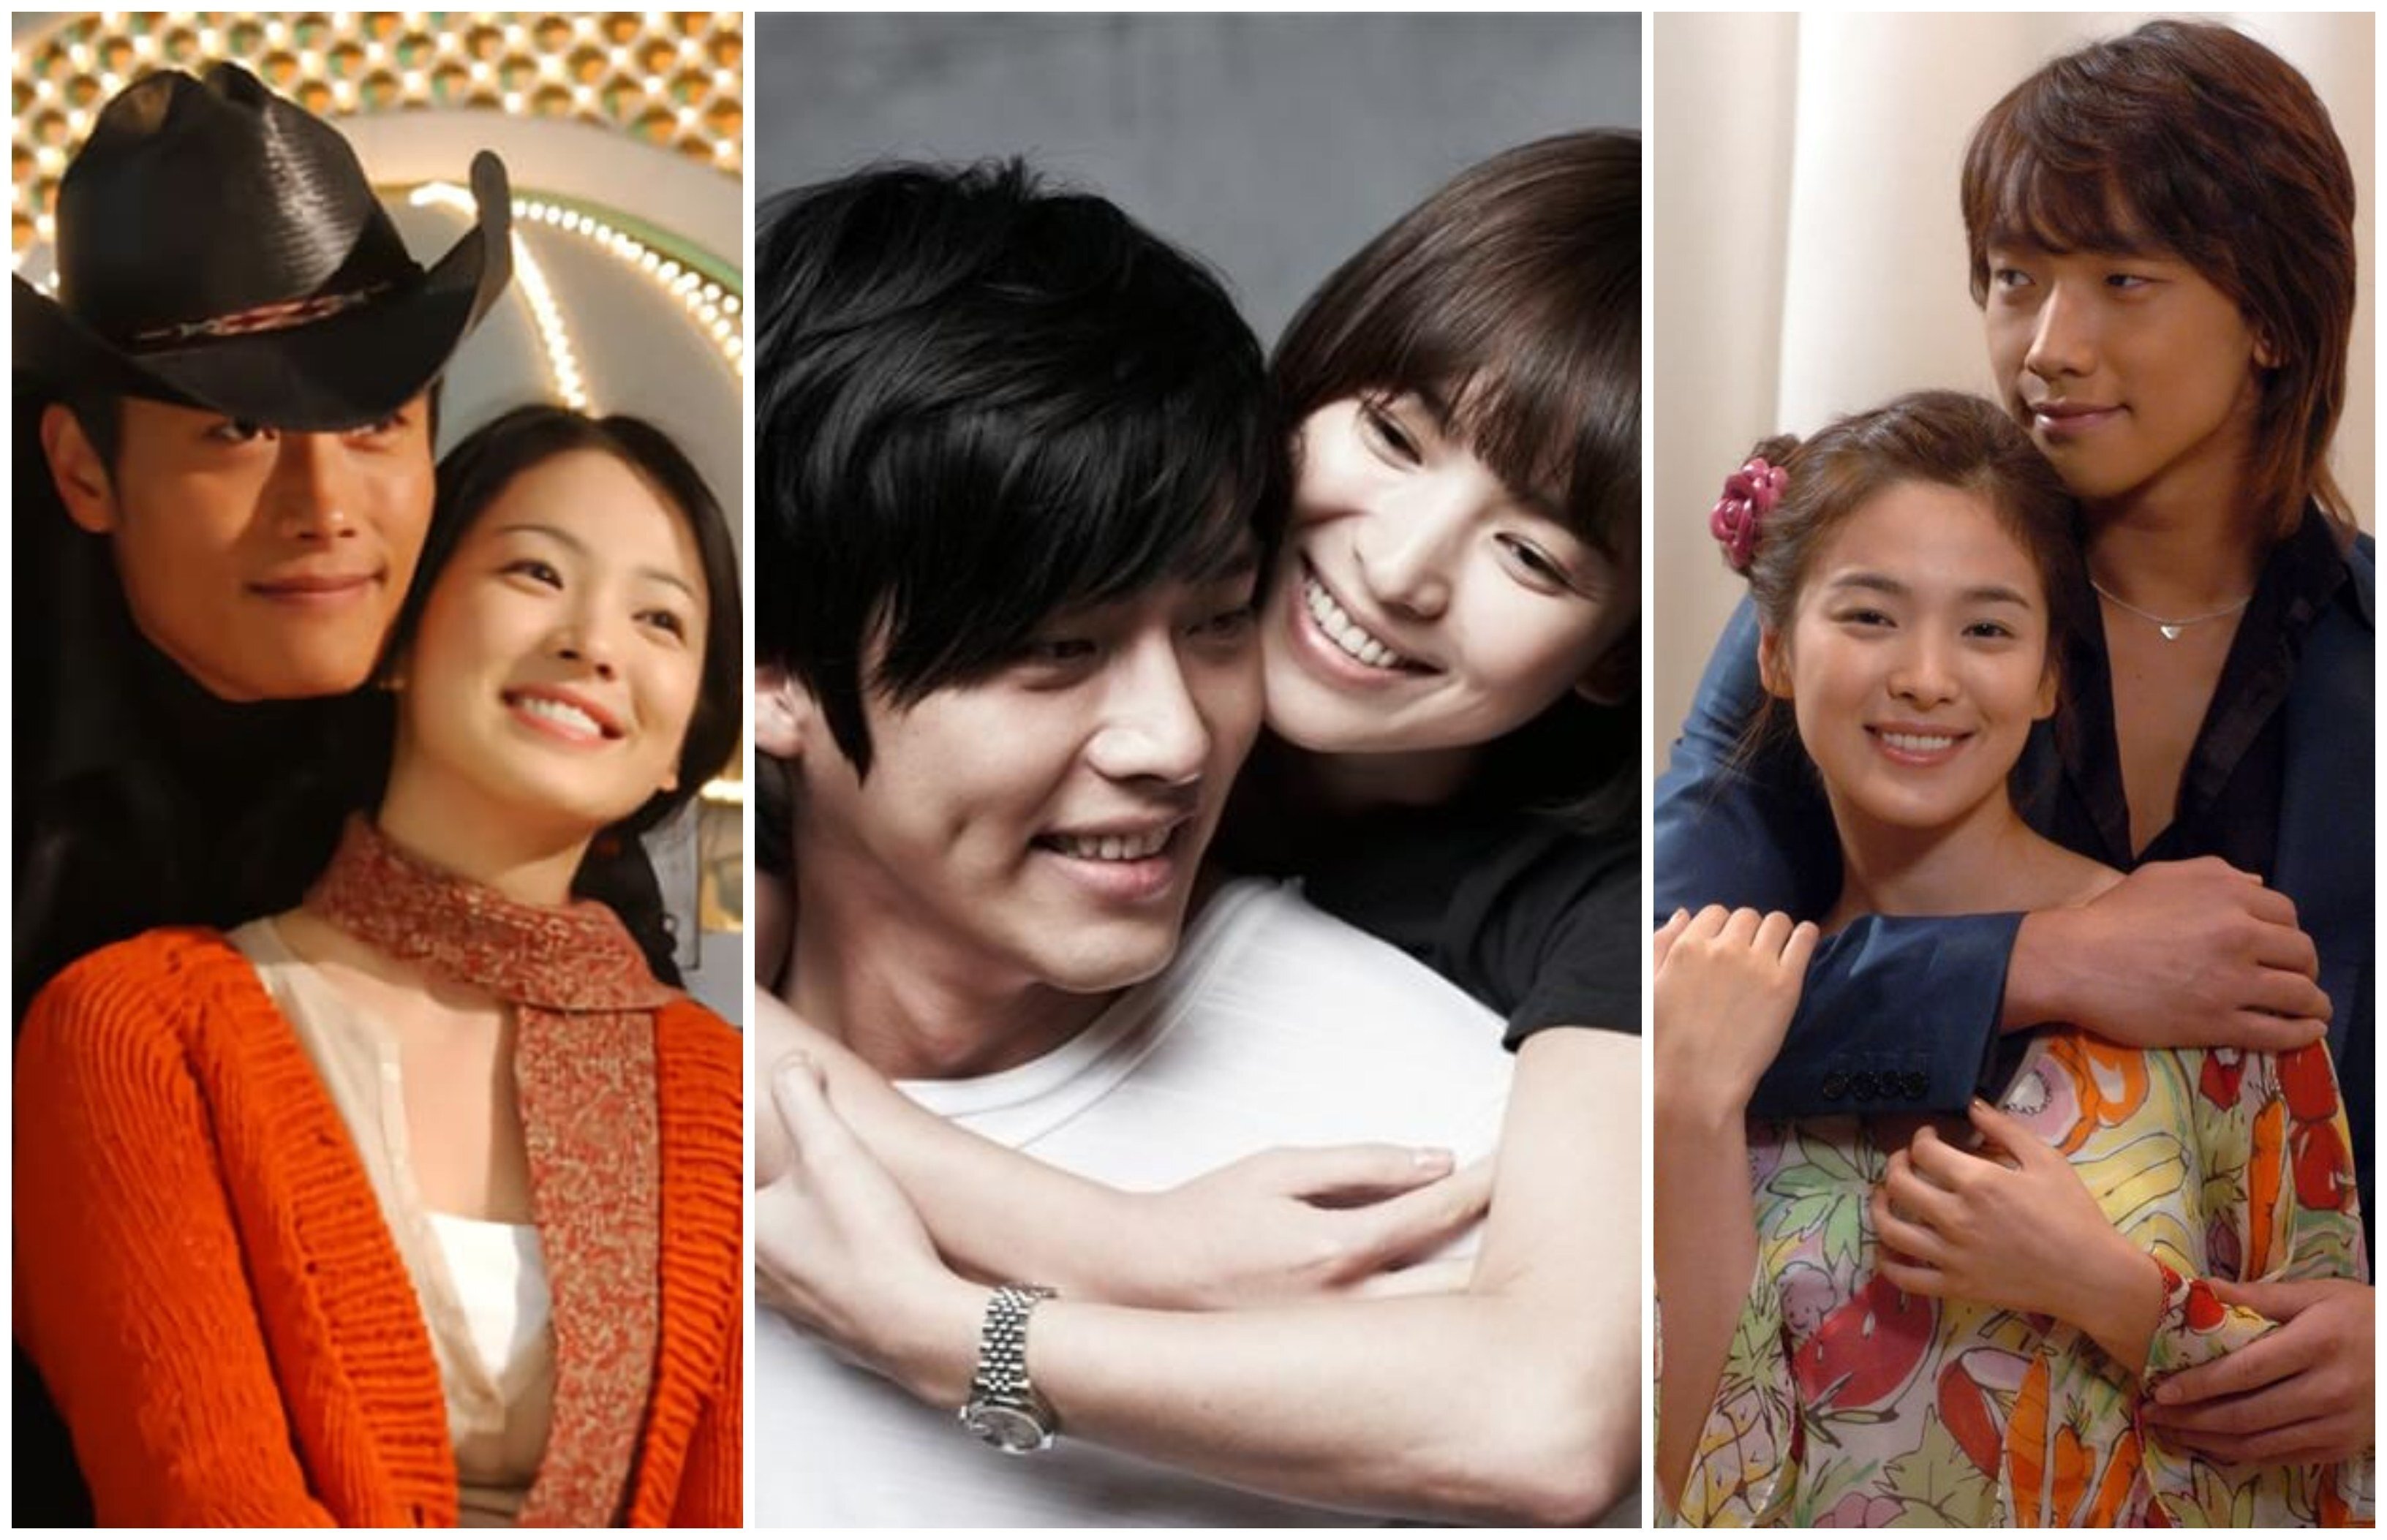 Song Hye-kyo has been romantically linked to many famous K-drama actors over the years, including Lee Byung-hun, Hyun Bin and Rain. Photos: KBS, SBS